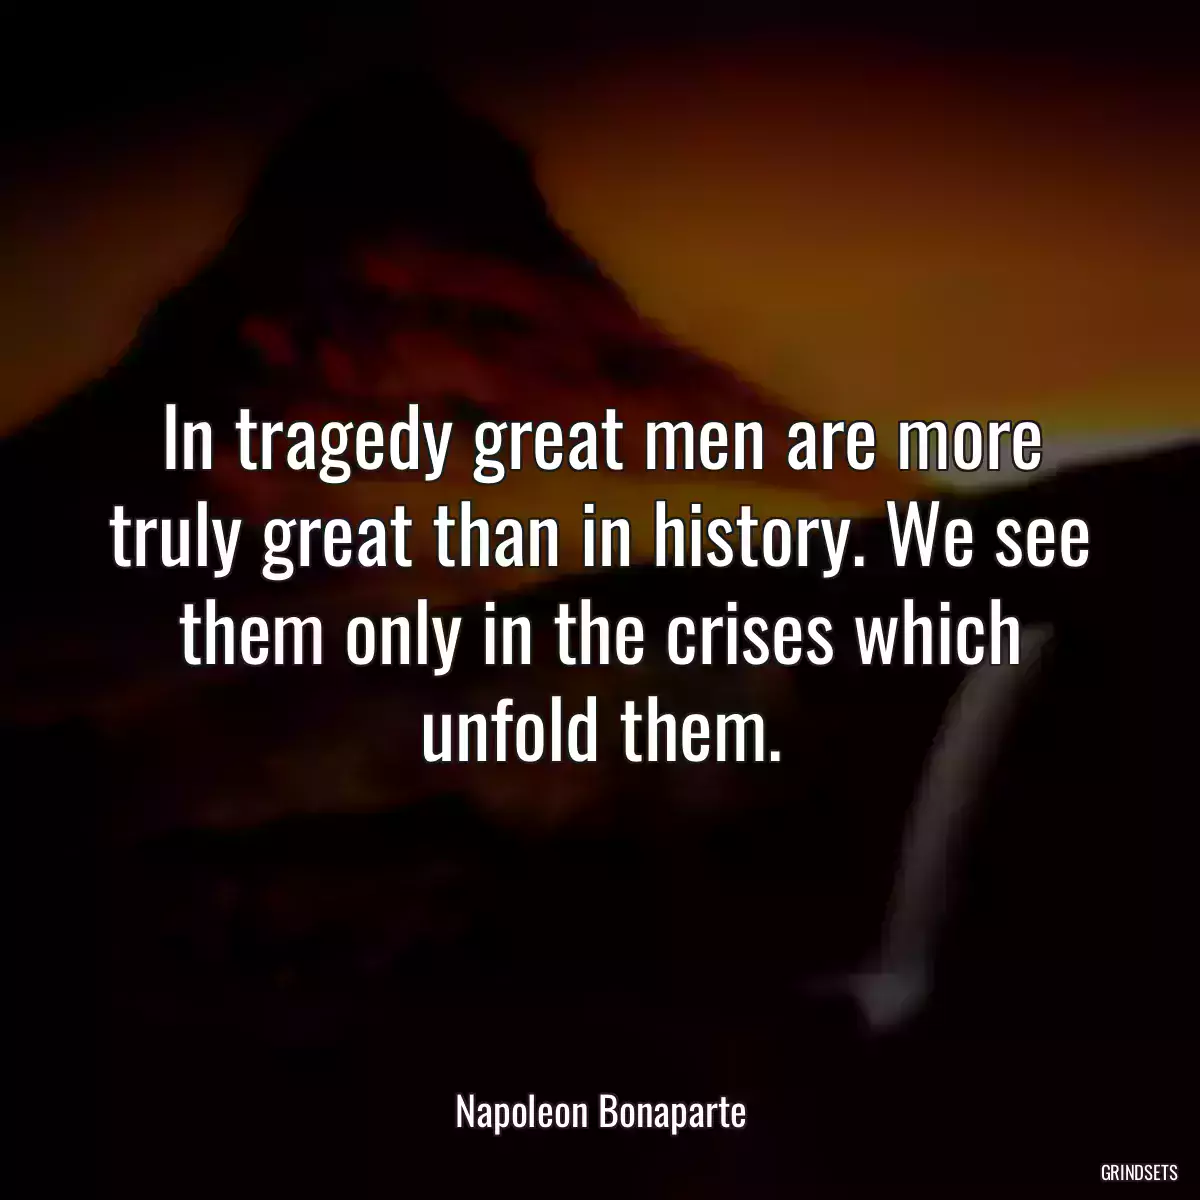 In tragedy great men are more truly great than in history. We see them only in the crises which unfold them.